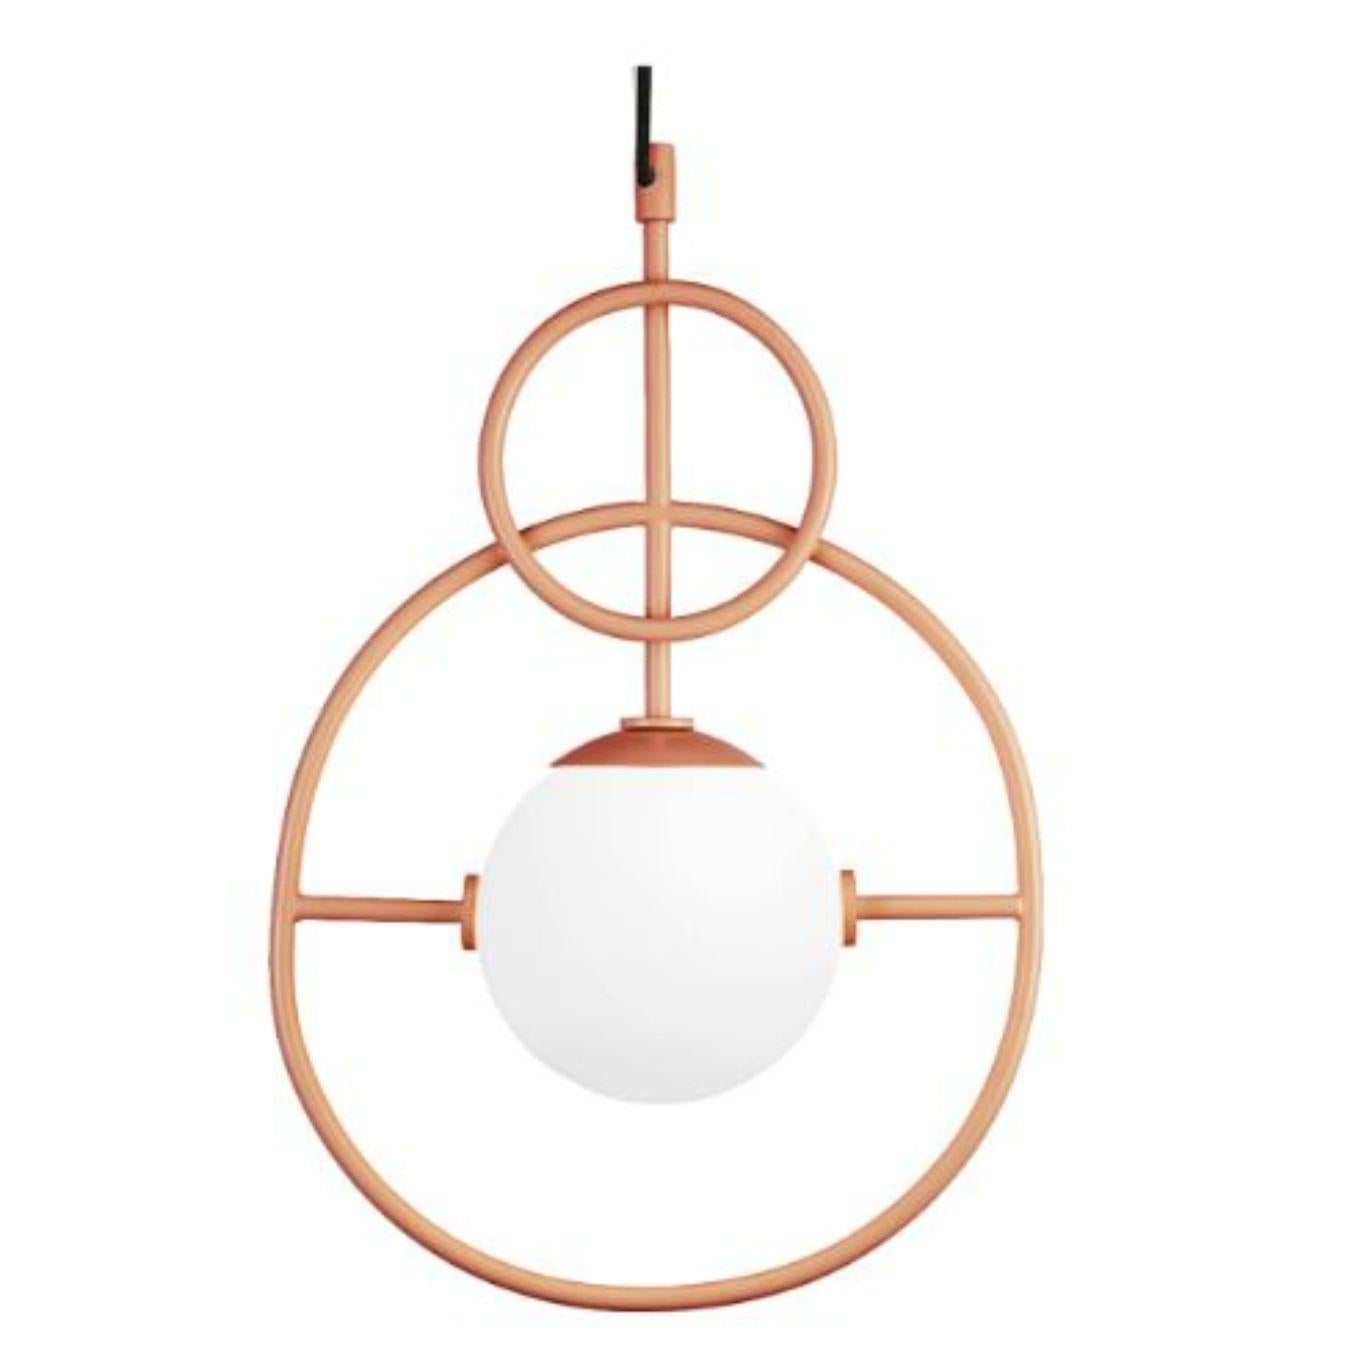 Salmon loop II suspension lamp by Dooq
Dimensions: W 31 x D 15 x H 47 cm
Materials: lacquered metal, polished or brushed metal.
Also available in different colours and materials.

Information:
230V/50Hz
1 x max. G9
4W LED

120V/60Hz
1 x max. G9
4W